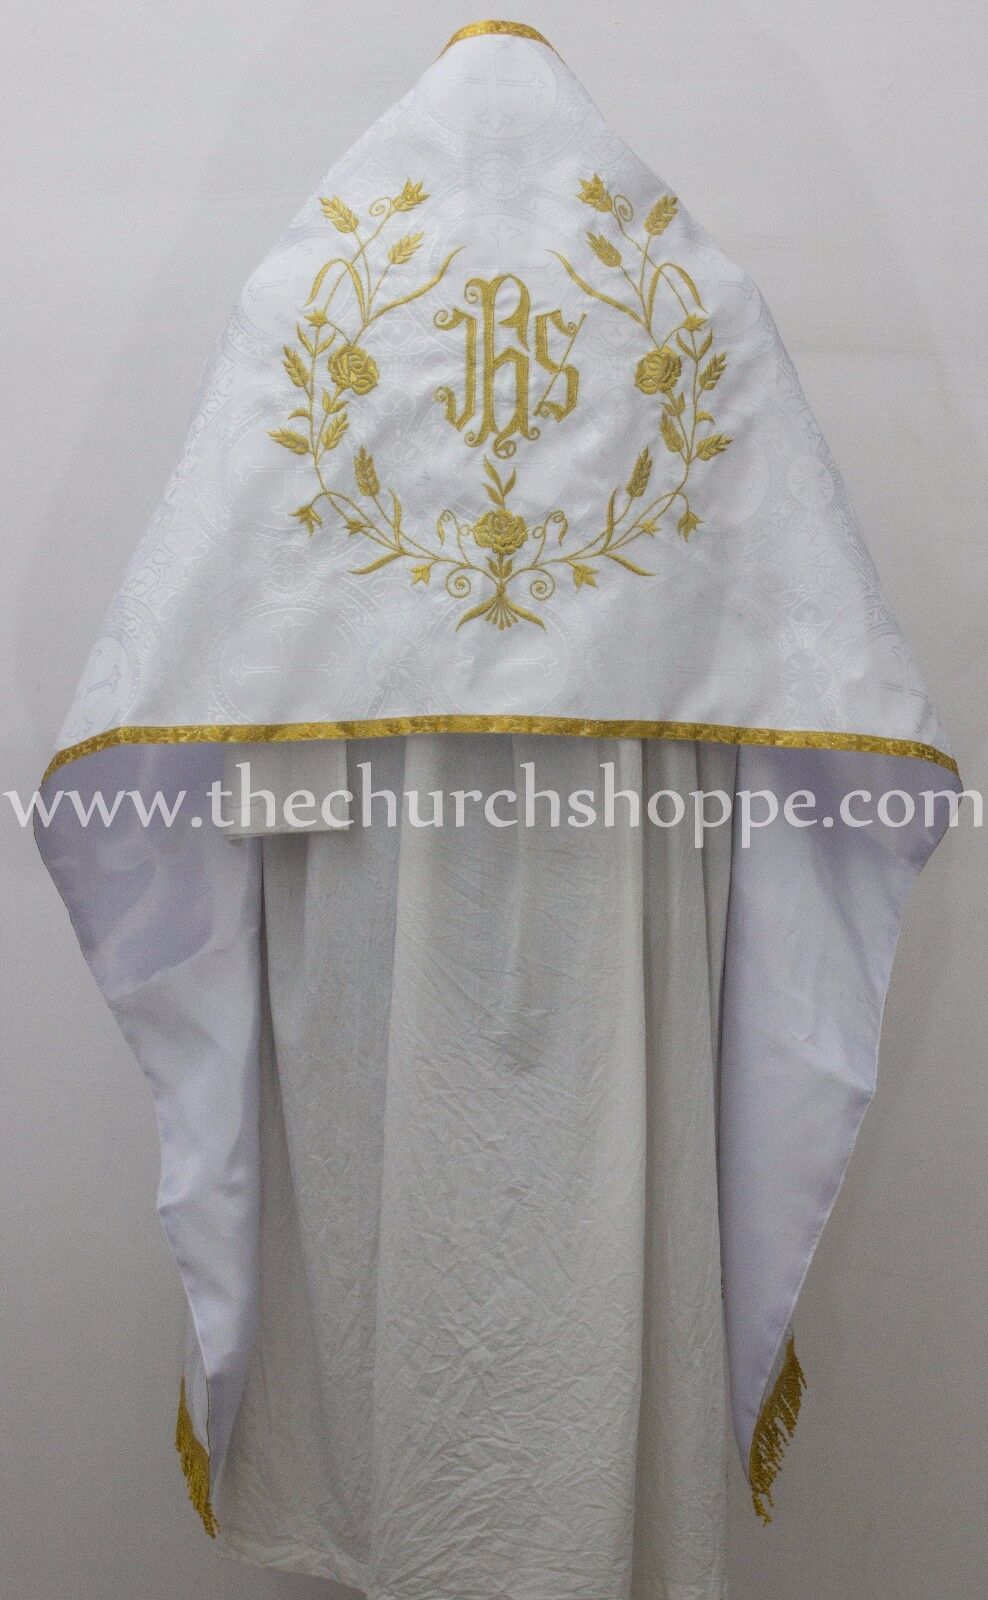 NEW WHITE Humeral Veil with IHS embroidery,voile huméral,velo omerale